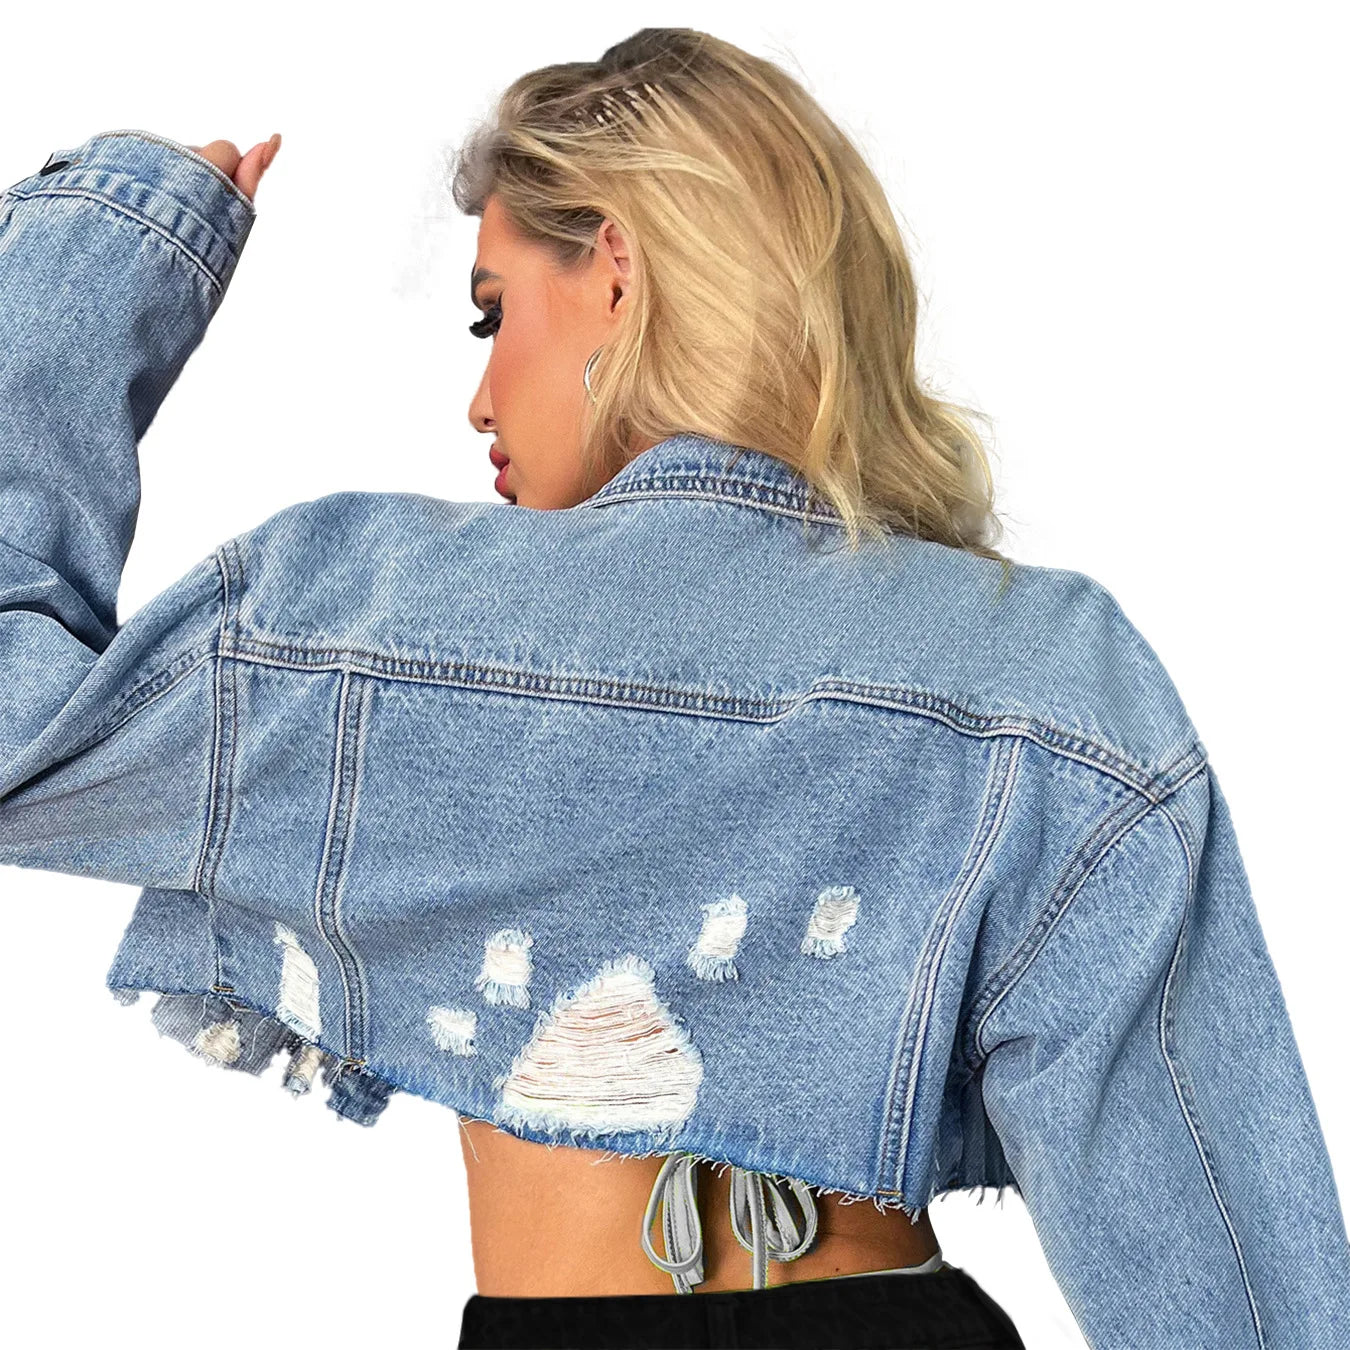 Women's Long Sleeve Ripped Denim Jacket Fashion Sexy Short Jeans Coat Casual Clothing XS-L